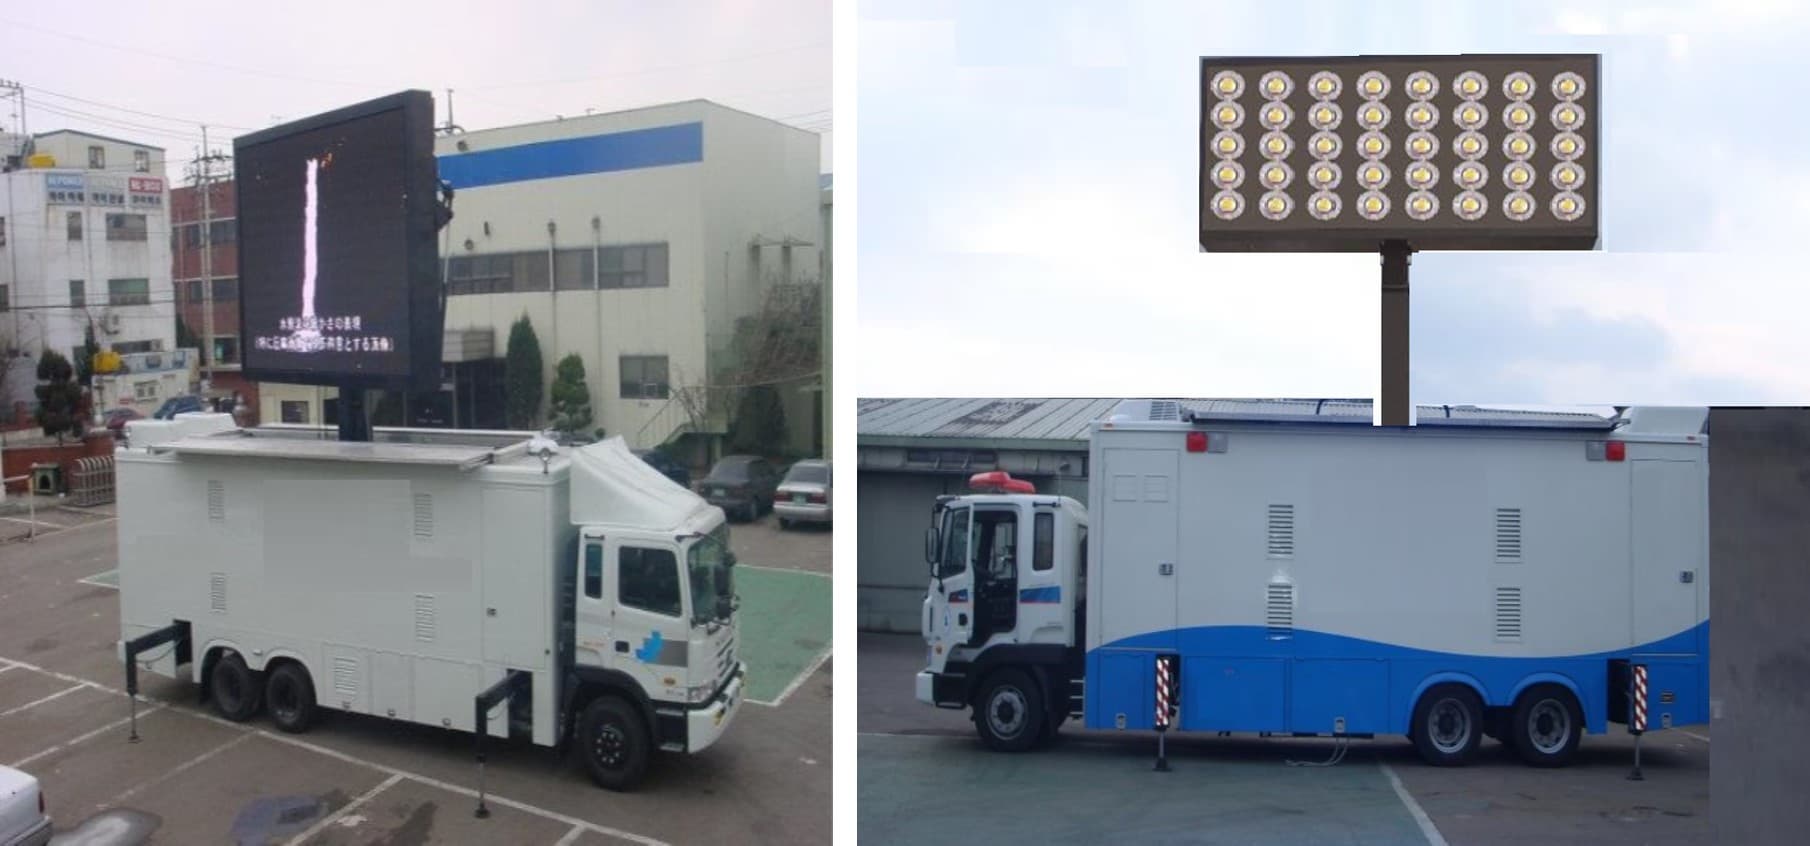 Disaster safety accident response product _ Vehicle moving type LED tower lighting system _